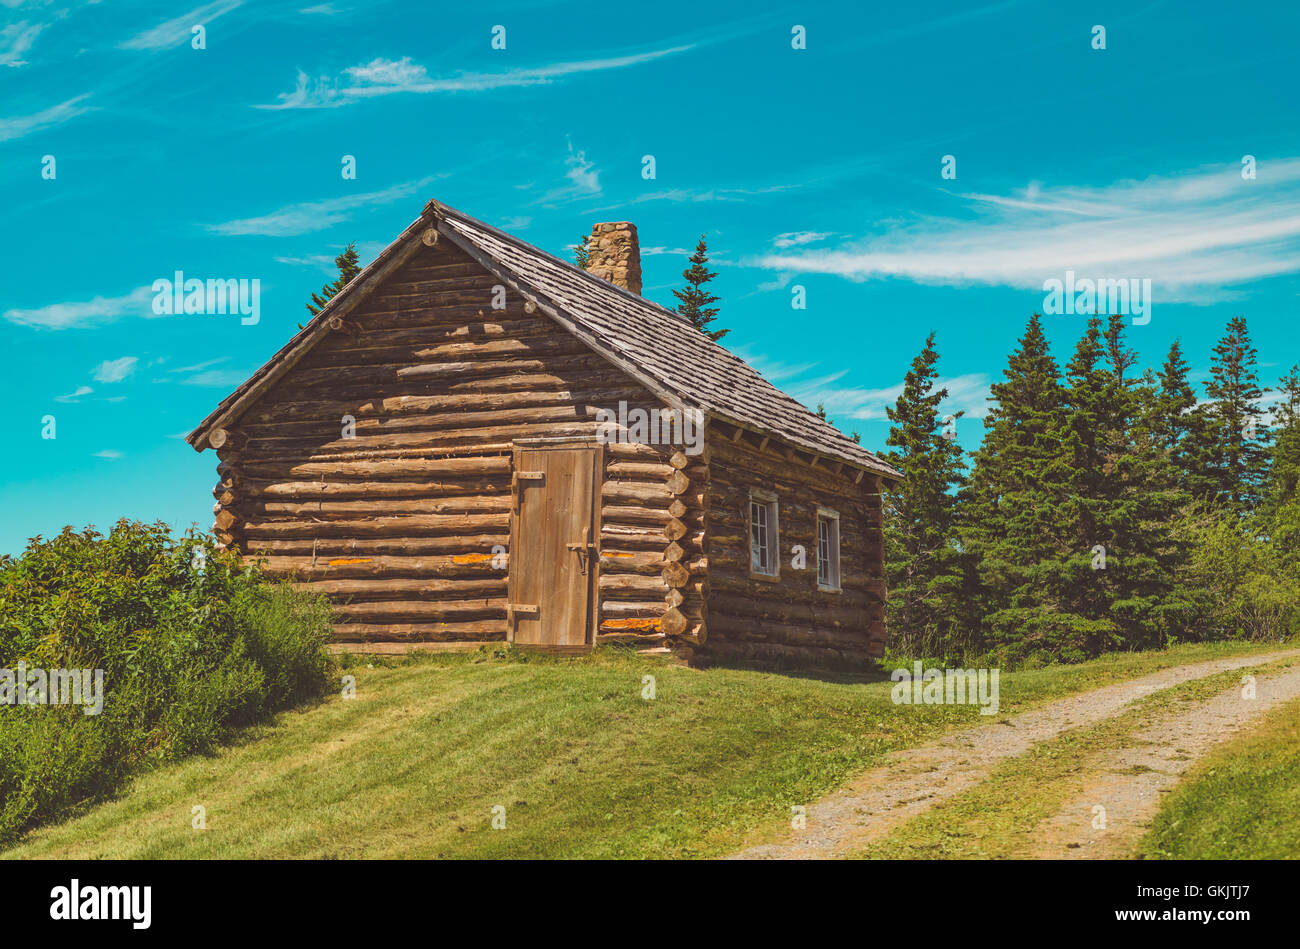 An old log cabin on a hilled forest in Canada. Color graded to give a classic Technicolor look from the late 50s. Stock Photo